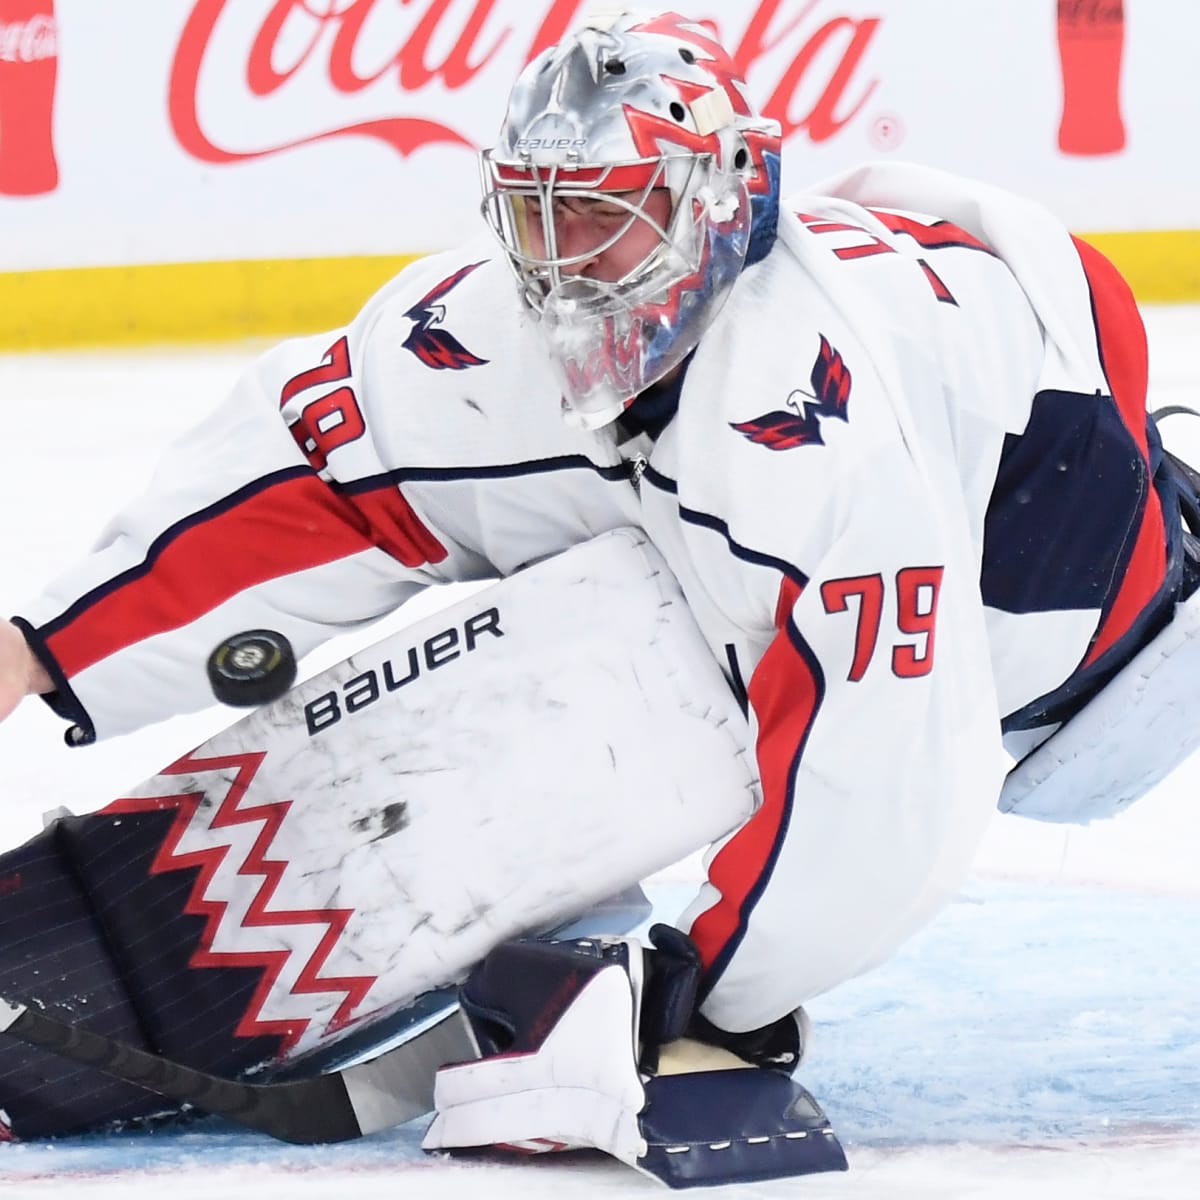 FIRST LOOK: Charlie Lindgren In Process Of Getting New Capitals Gear